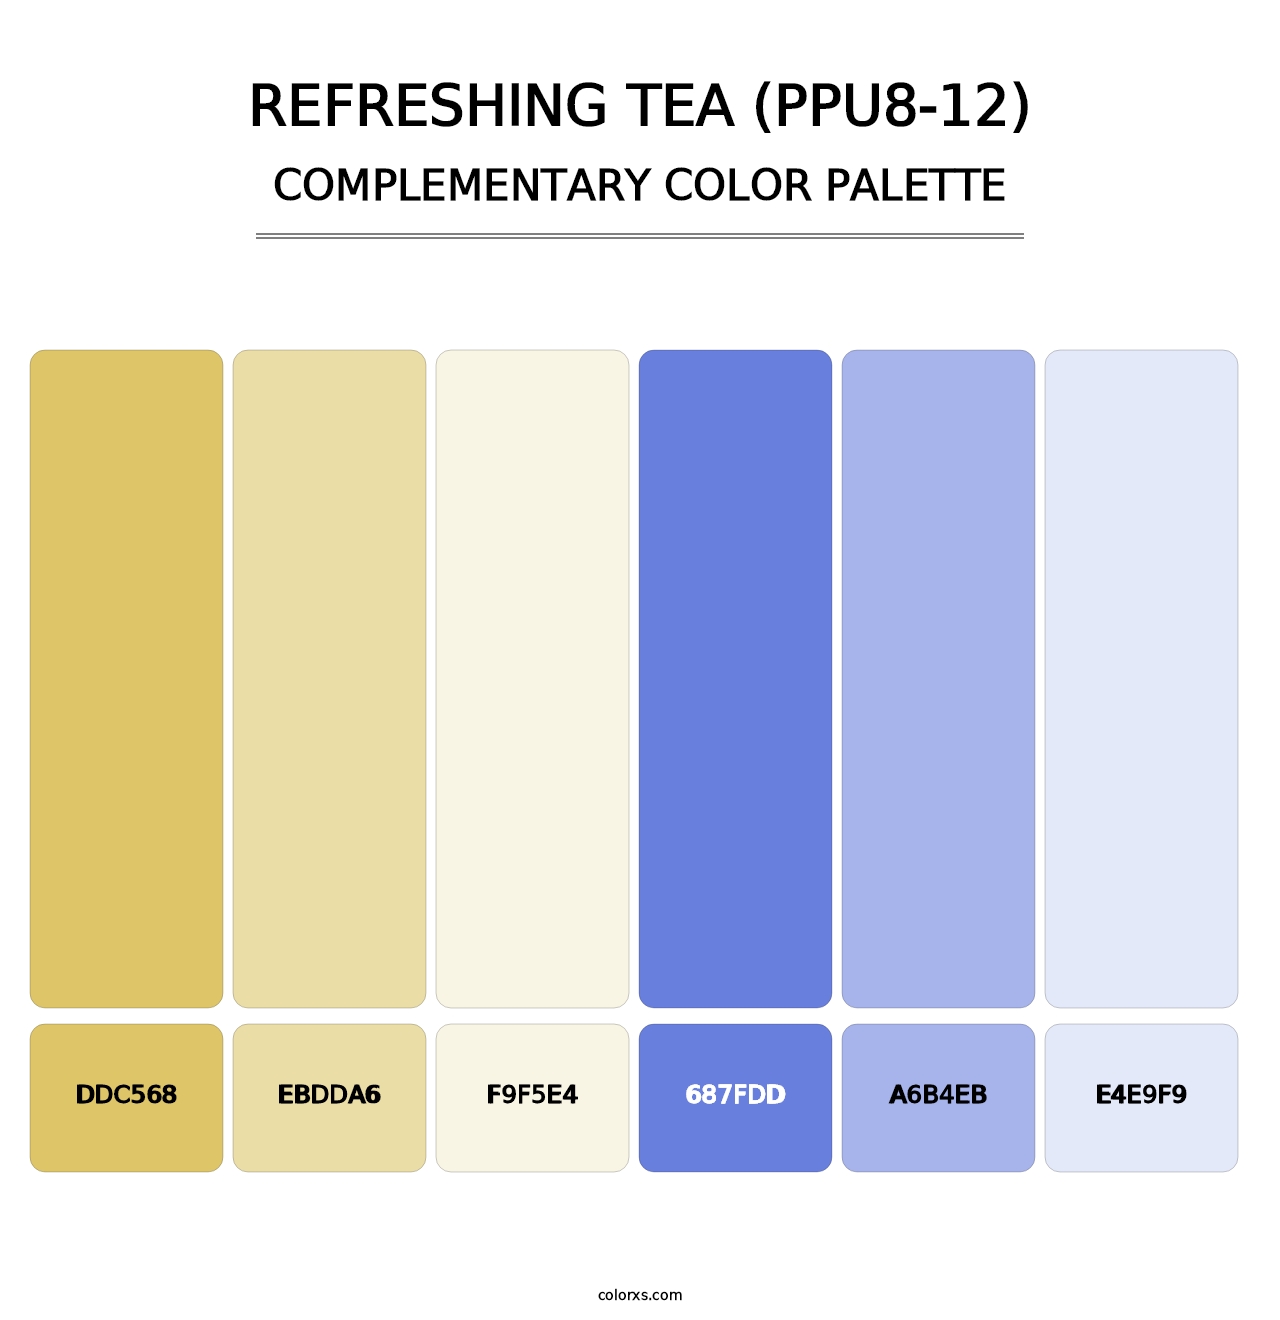 Refreshing Tea (PPU8-12) - Complementary Color Palette